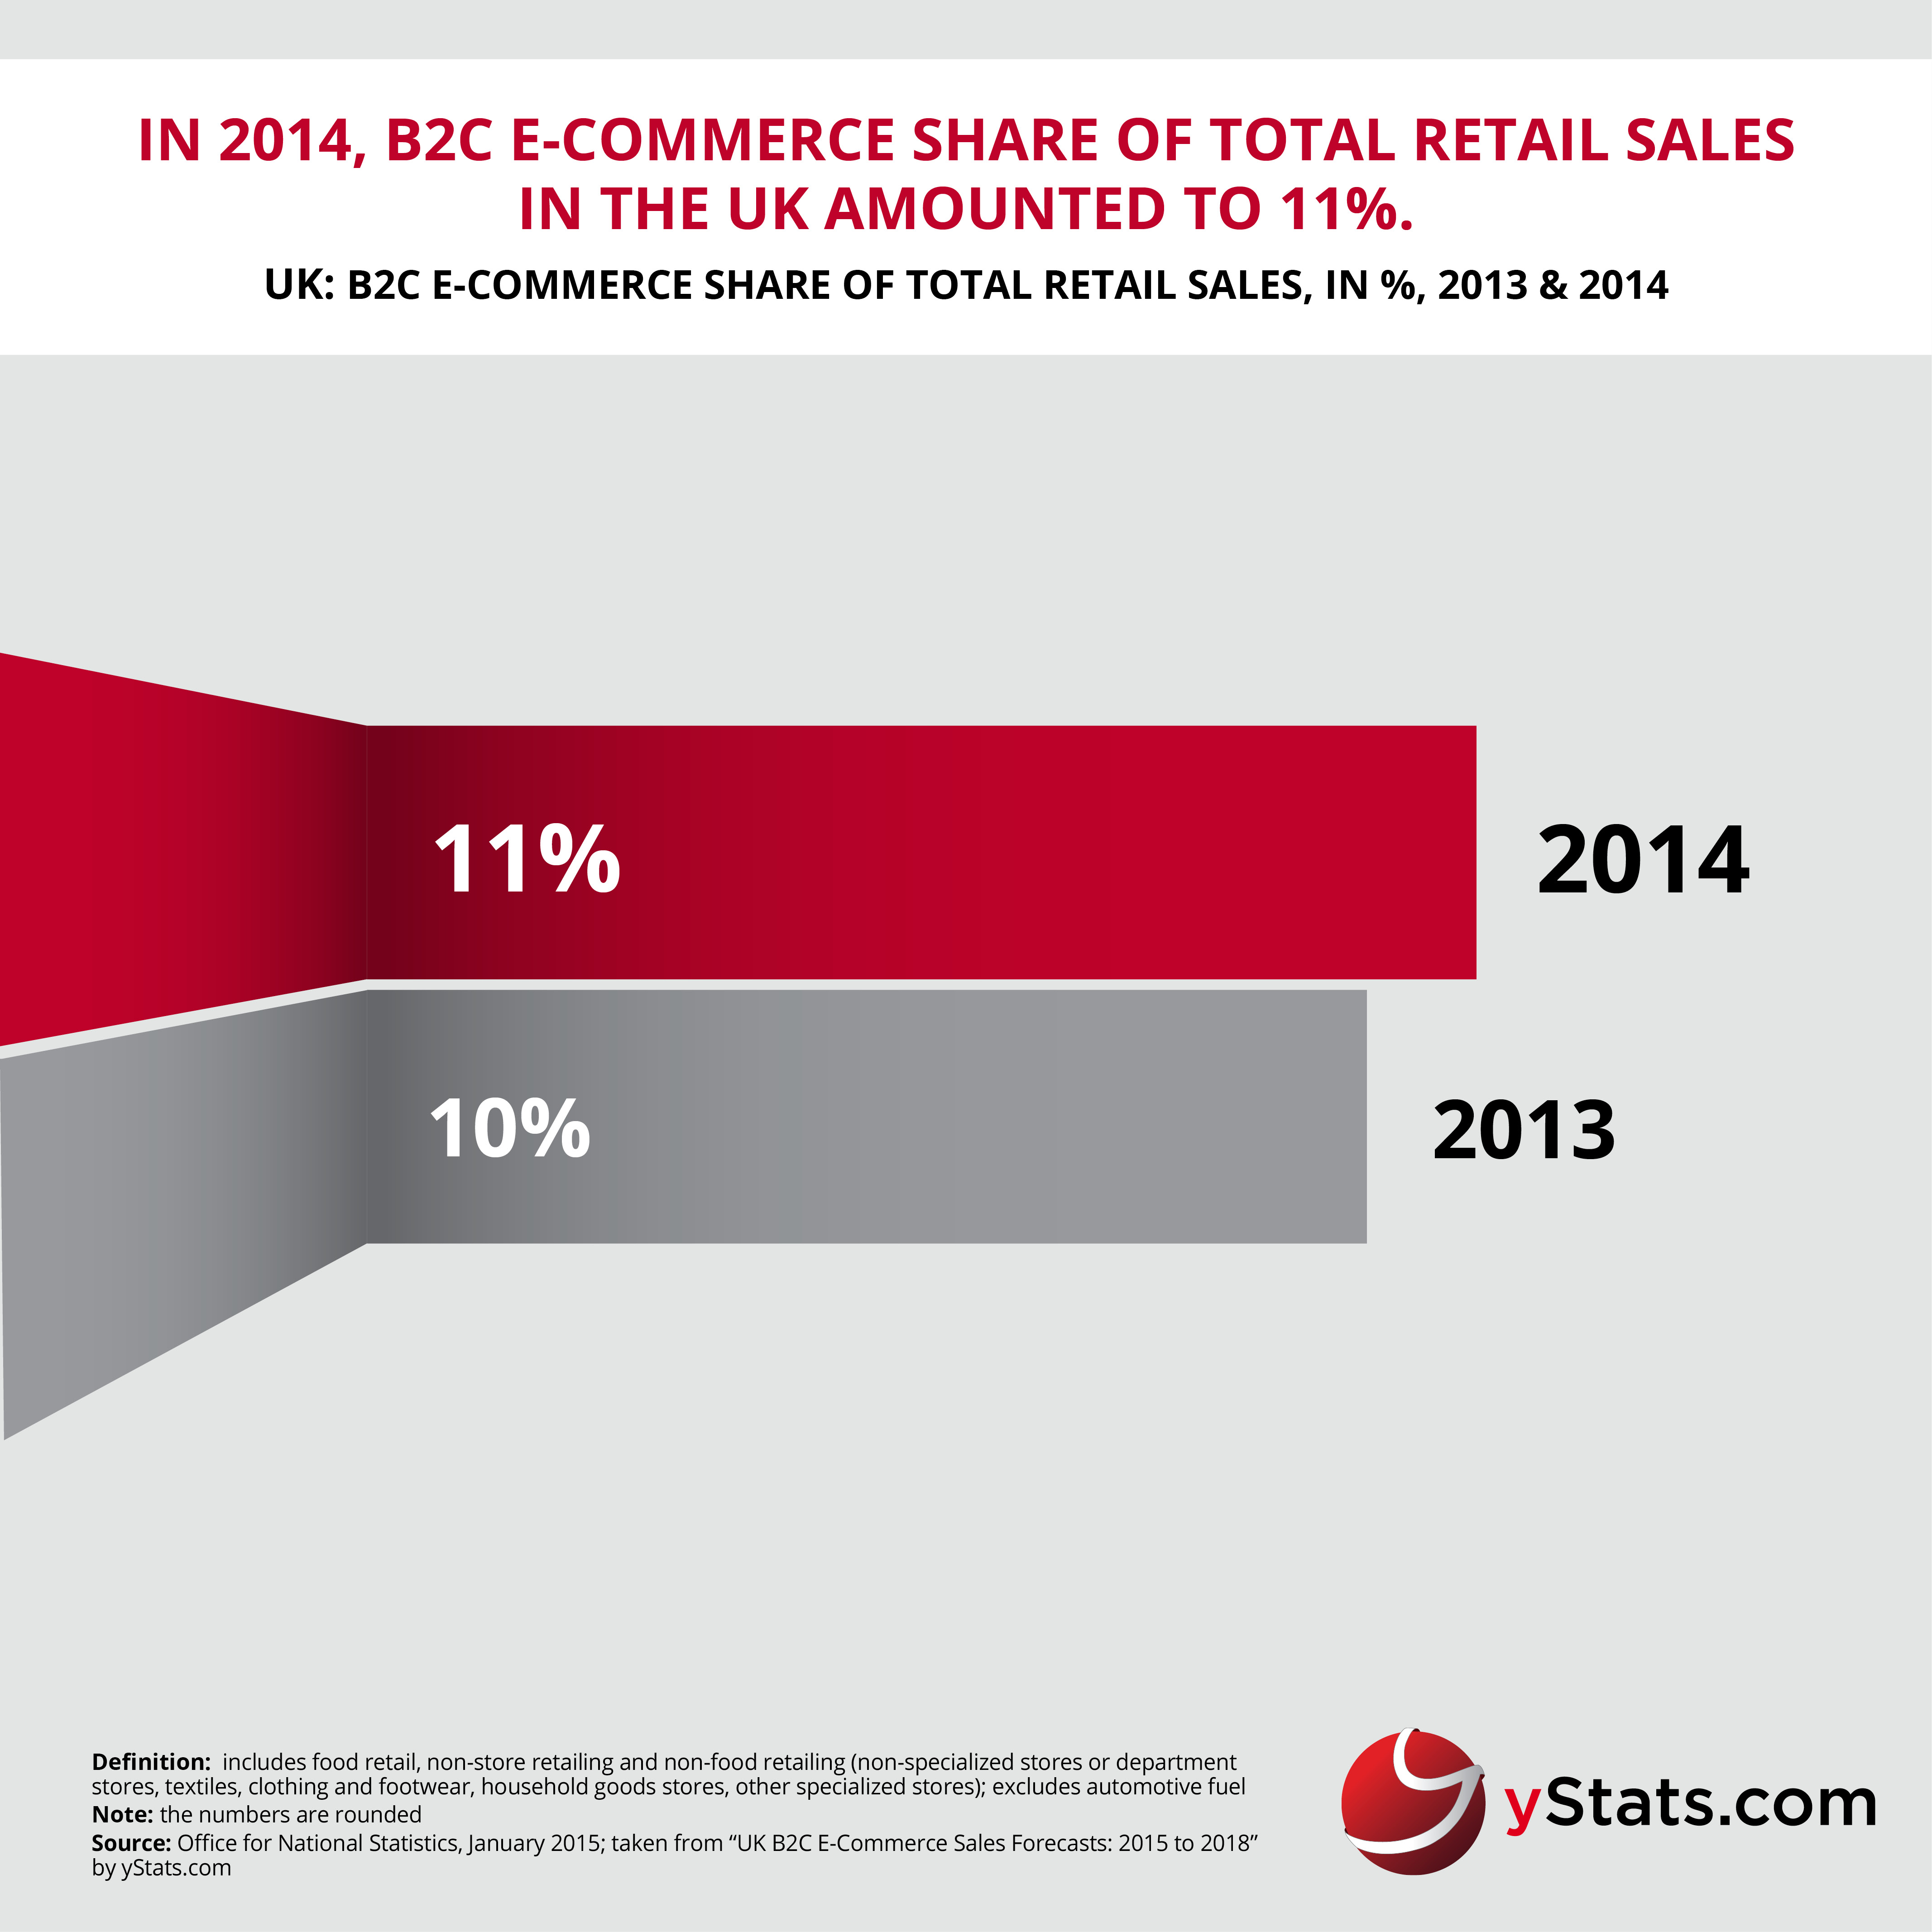 Infographic_UK B2C E-Commerce Sales Forecasts 2015 to 2018